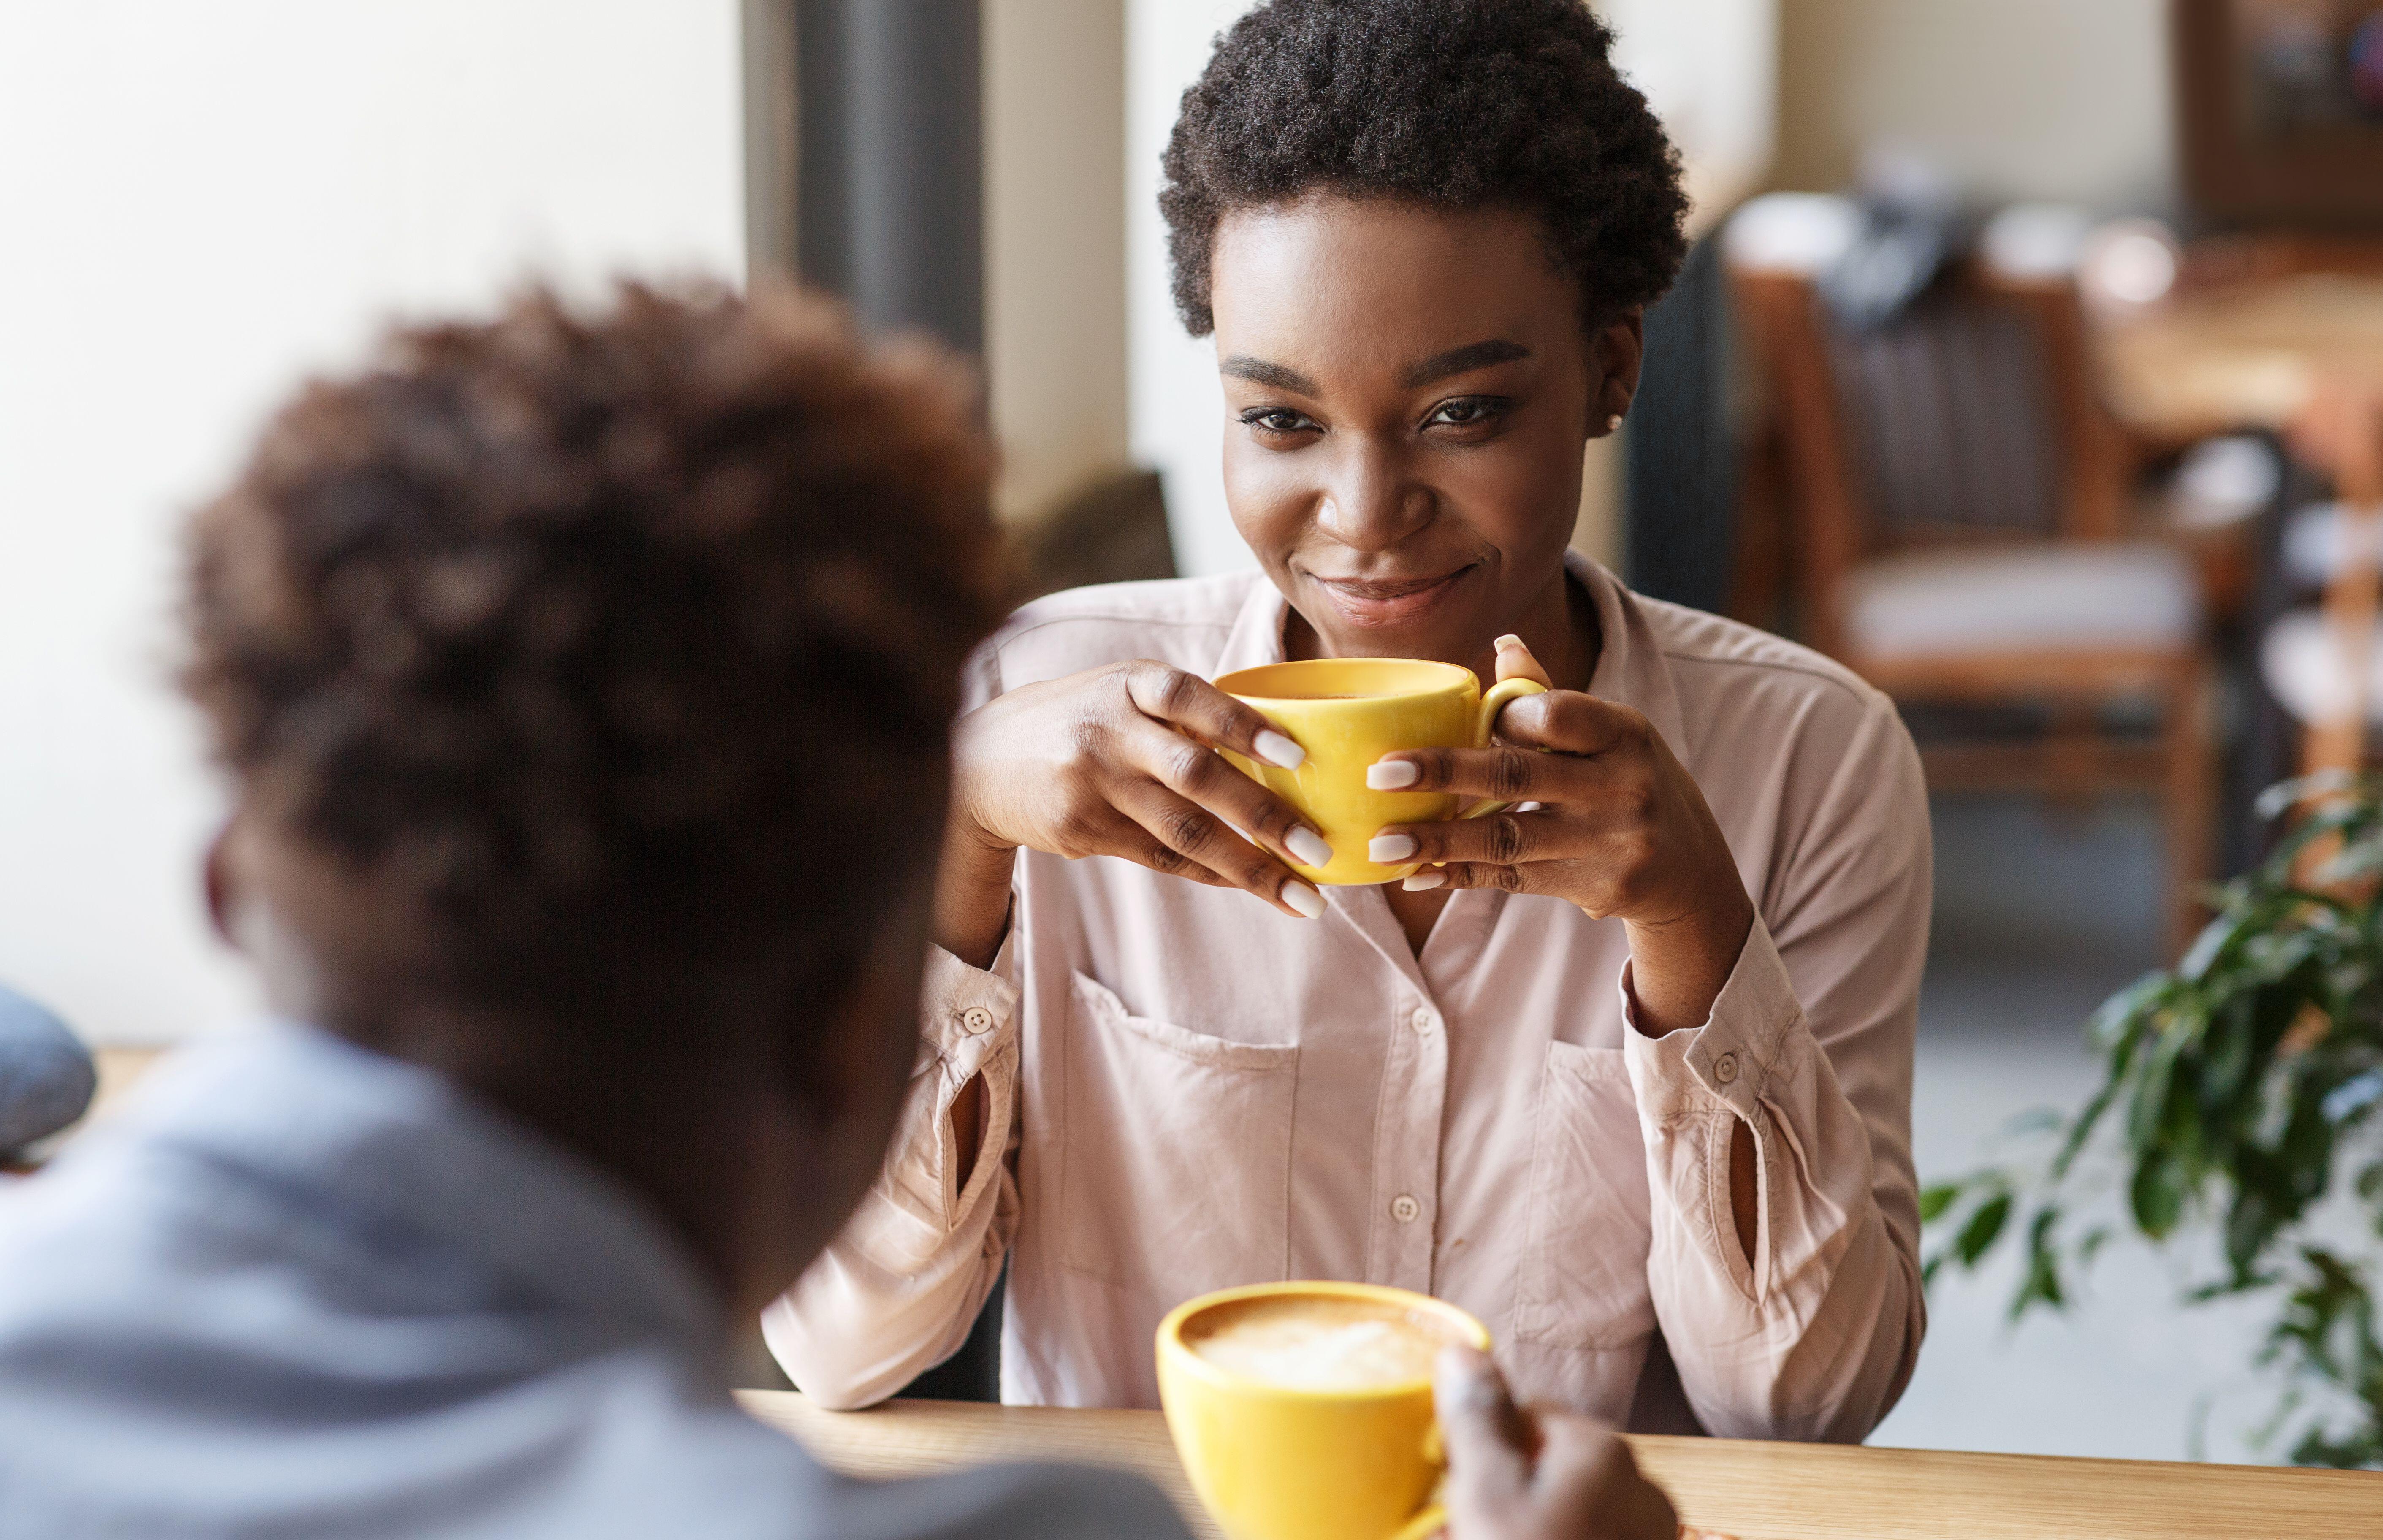 Young black couple drinking coffee together on date at cafe